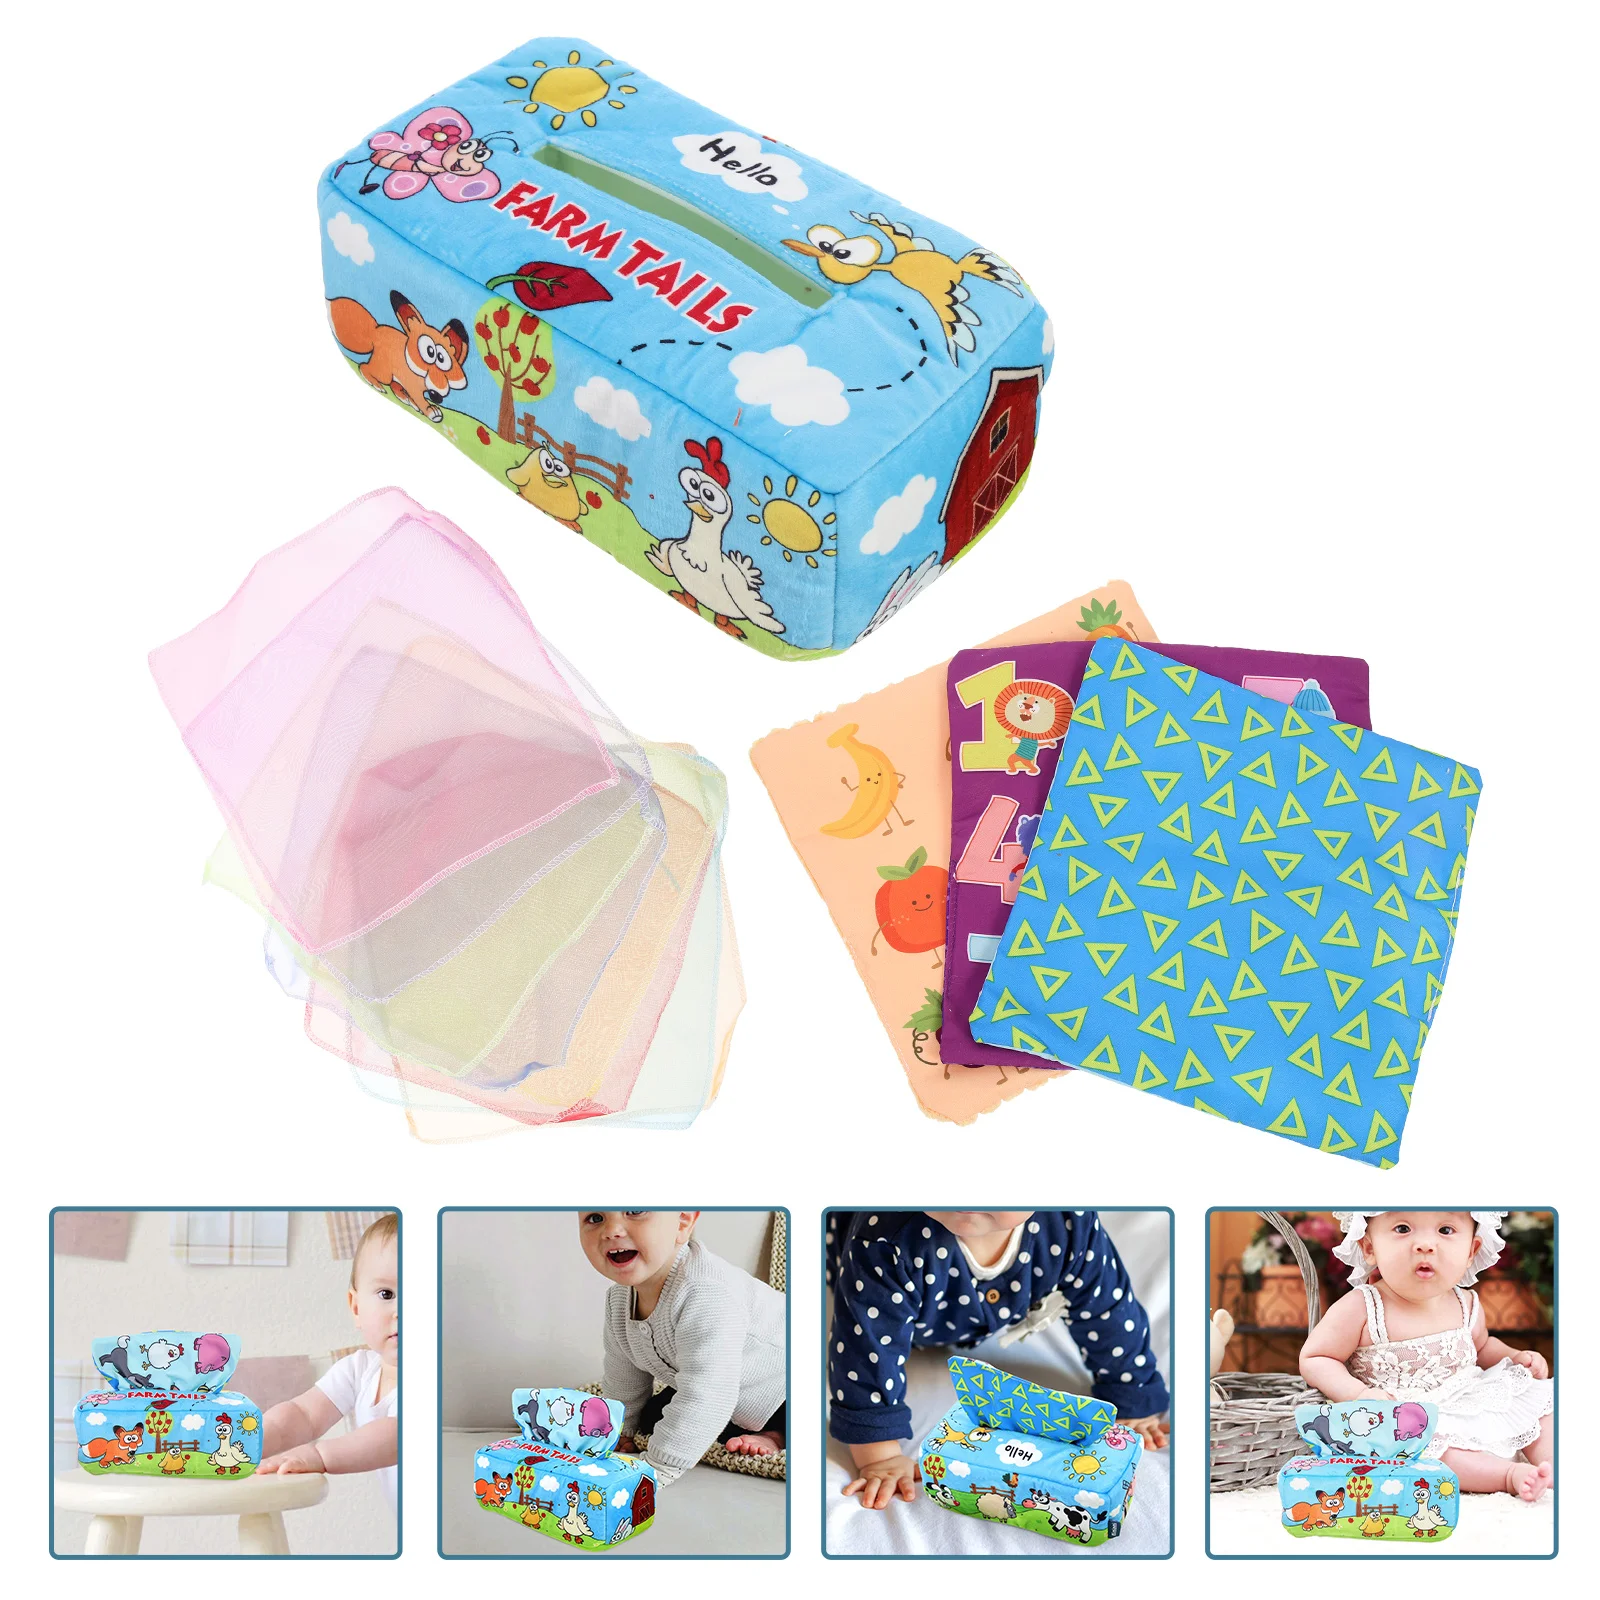 

1 Set Creative Napkin Box Playthings Interesting Tissue Box Baby Toys Educational Playthings for Home School Toddler Gift